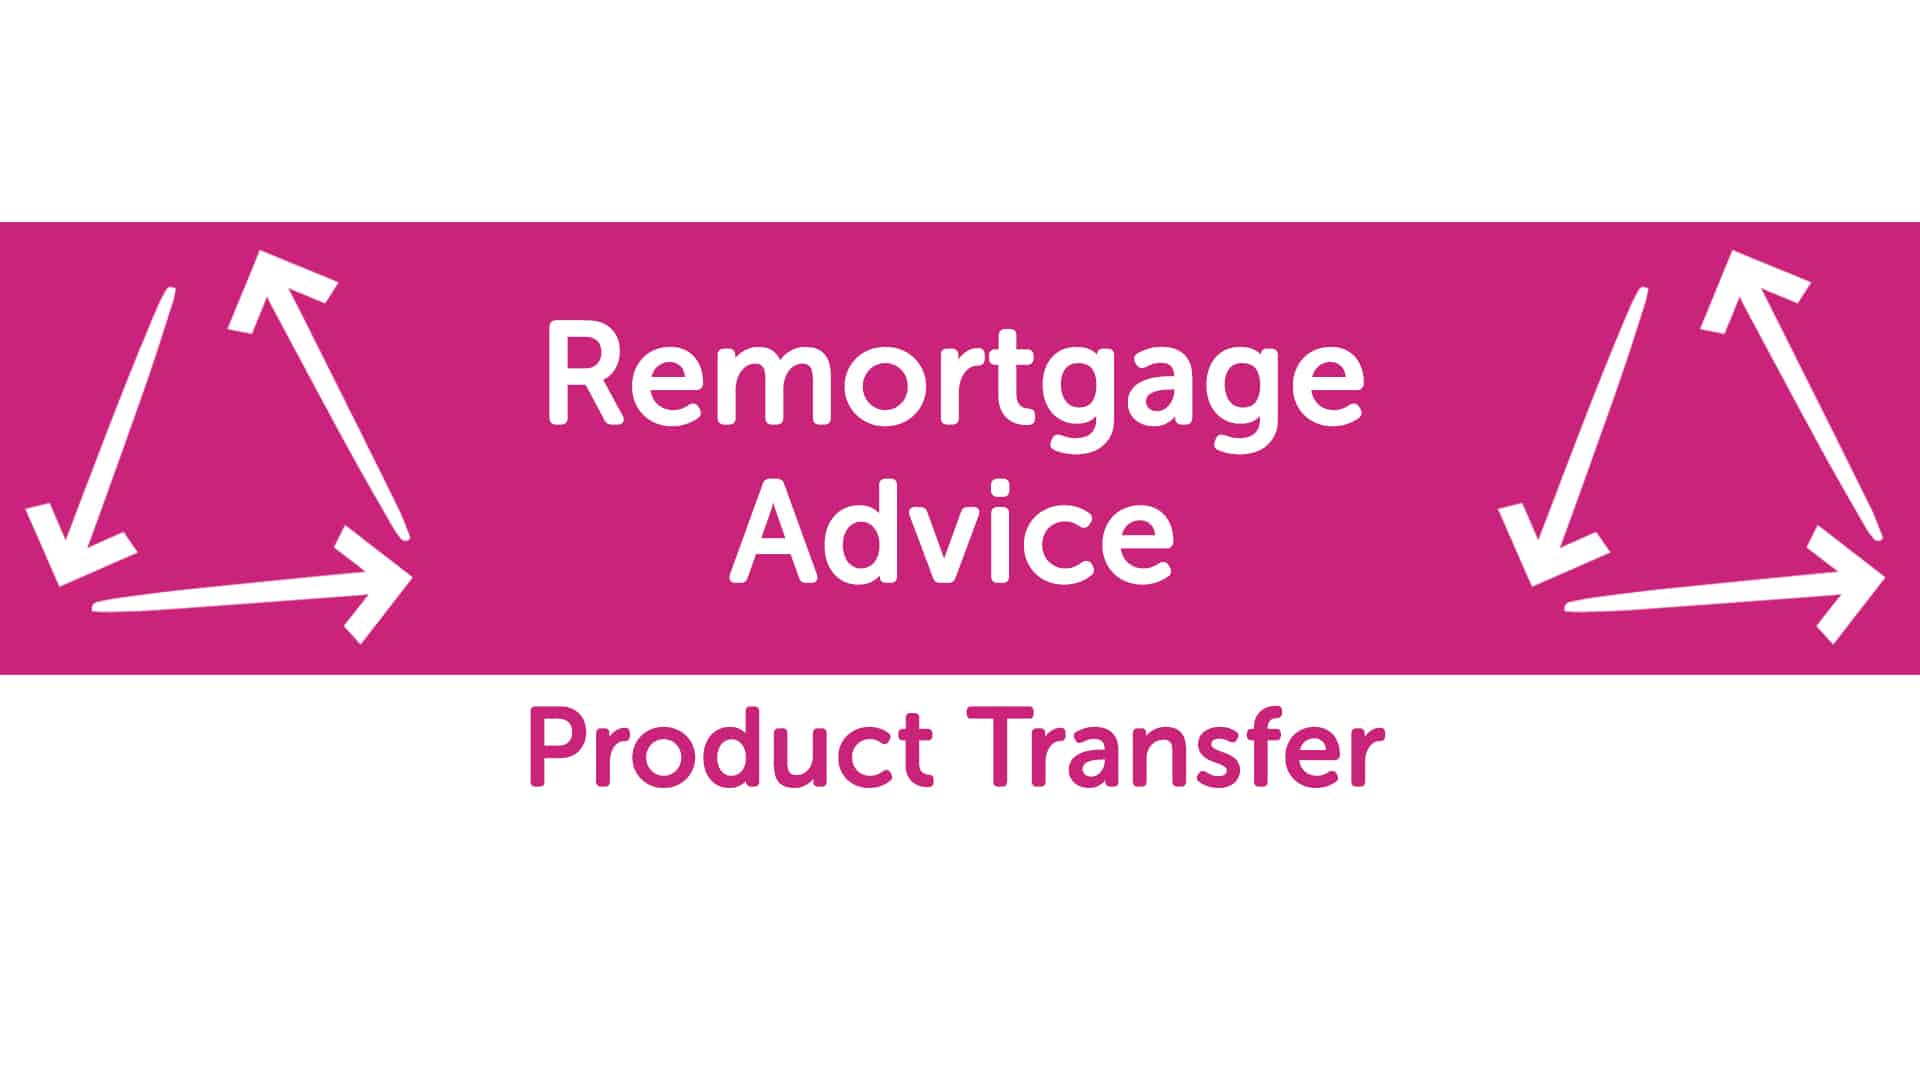 Product Transfer V Remortgage Advice in Coventry